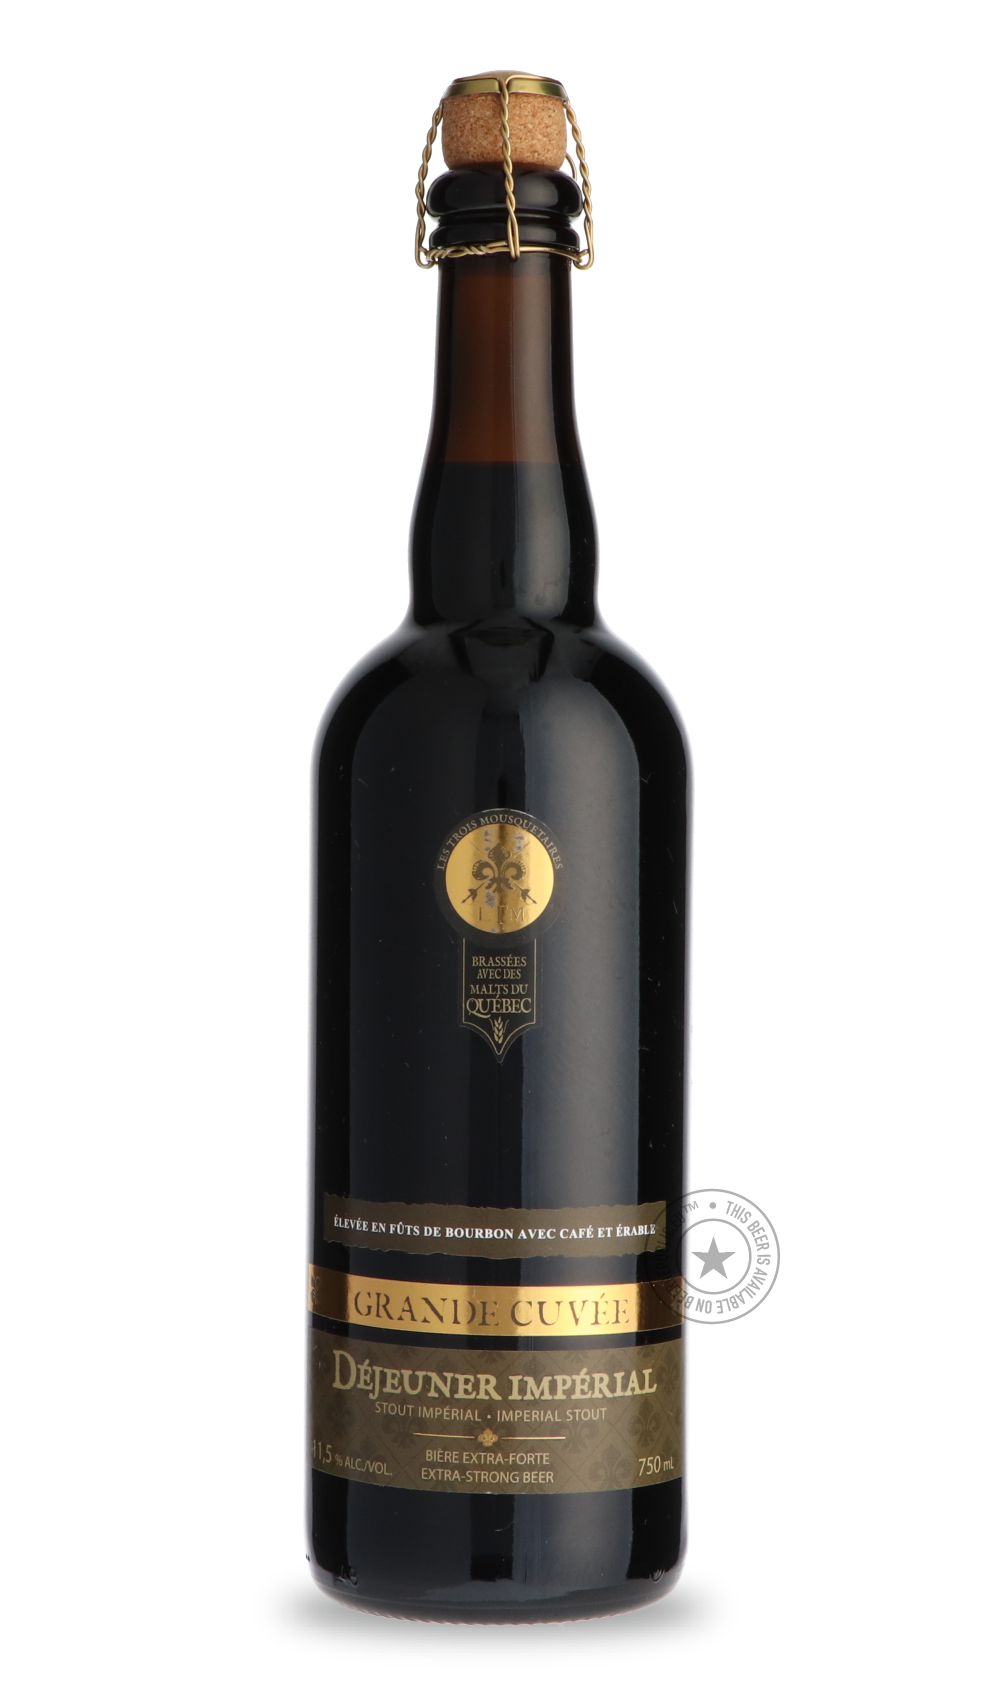 -Les Trois Mousquetaires- Déjeuner Impérial-Stout & Porter- Only @ Beer Republic - The best online beer store for American & Canadian craft beer - Buy beer online from the USA and Canada - Bier online kopen - Amerikaans bier kopen - Craft beer store - Craft beer kopen - Amerikanisch bier kaufen - Bier online kaufen - Acheter biere online - IPA - Stout - Porter - New England IPA - Hazy IPA - Imperial Stout - Barrel Aged - Barrel Aged Imperial Stout - Brown - Dark beer - Blond - Blonde - Pilsner - Lager - Whe